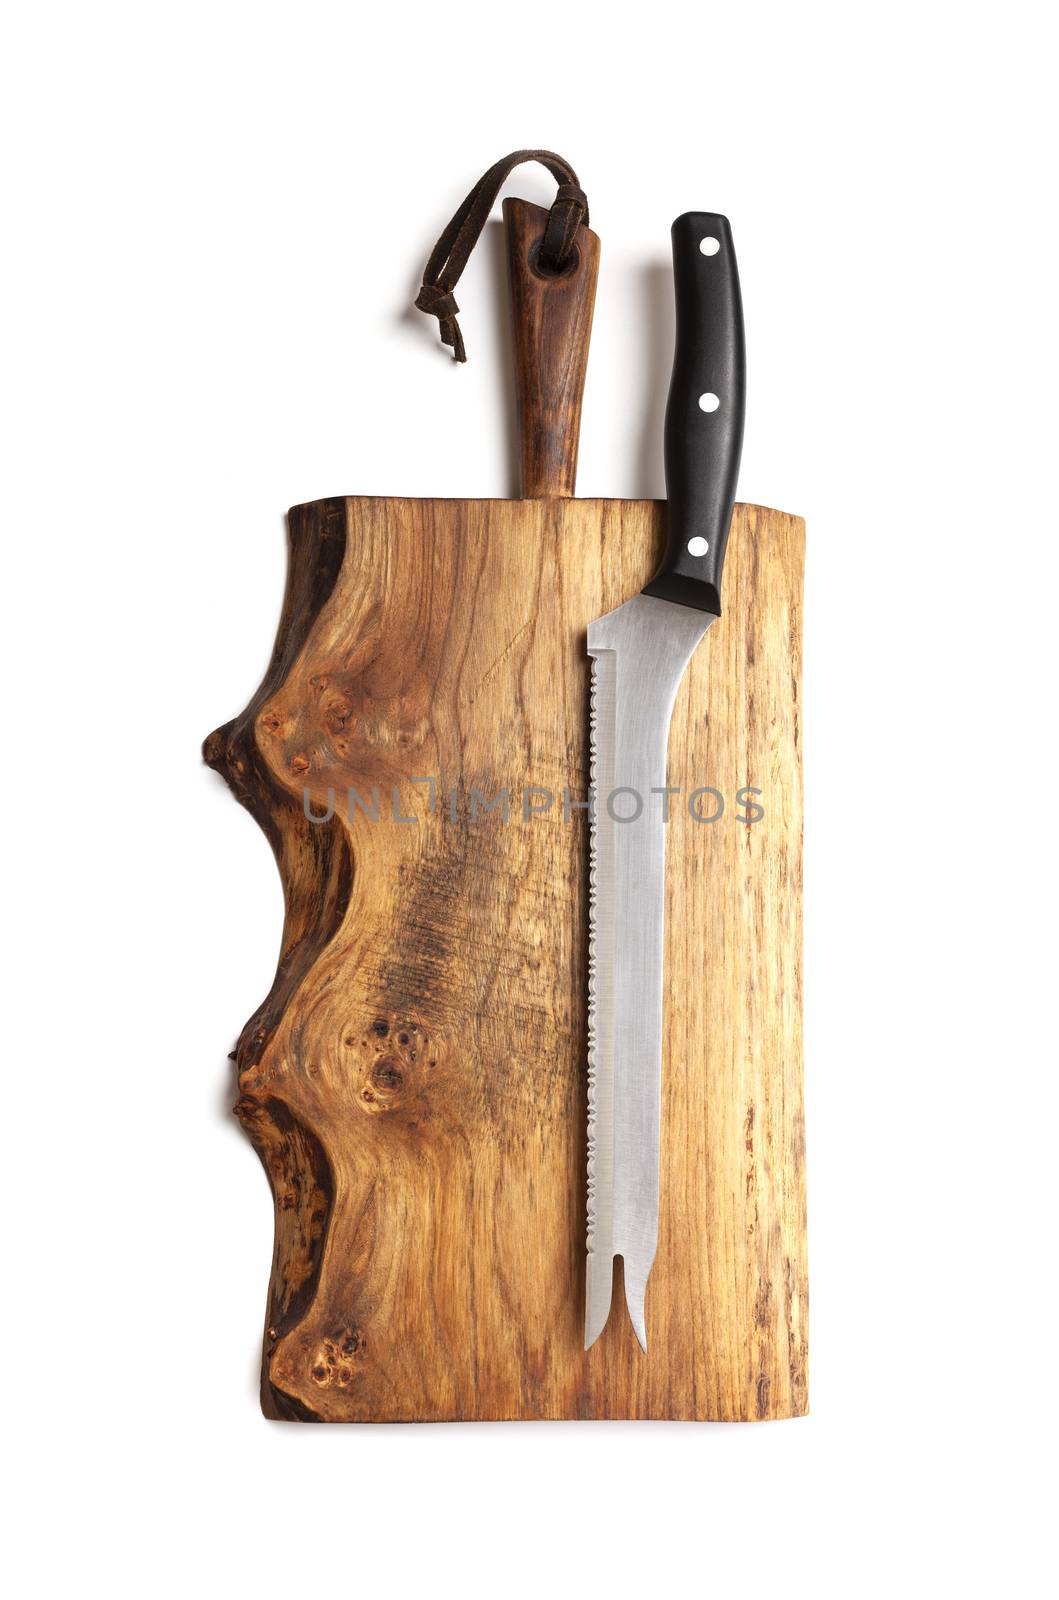 Knife Serrated for kitchen on old wooden cutting Board by SlayCer